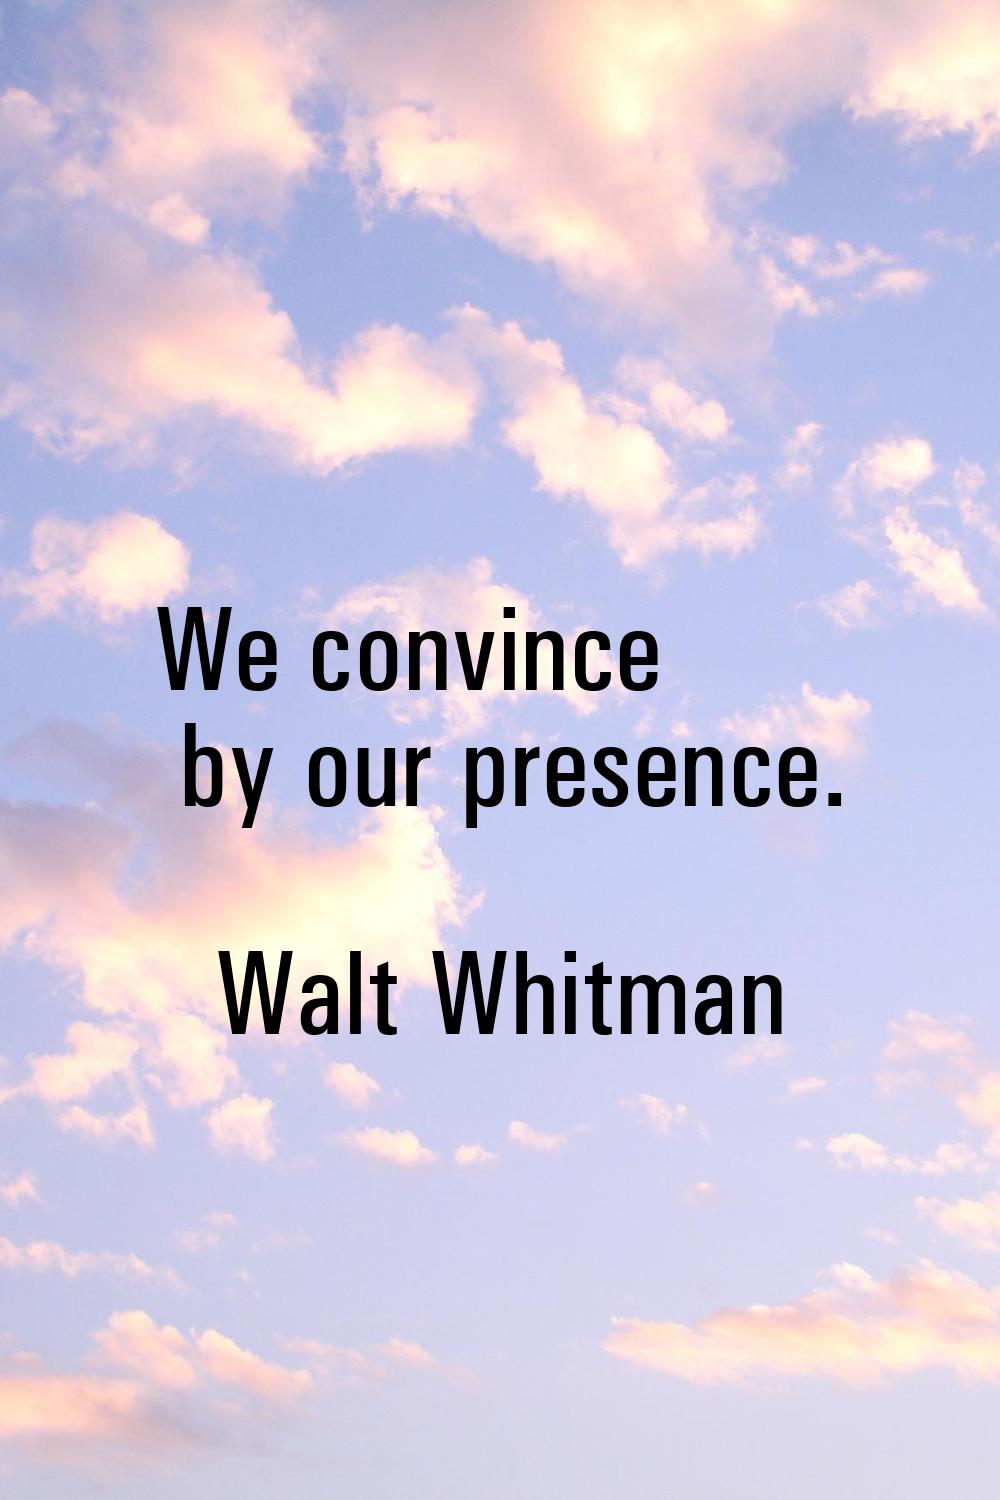 We convince by our presence.